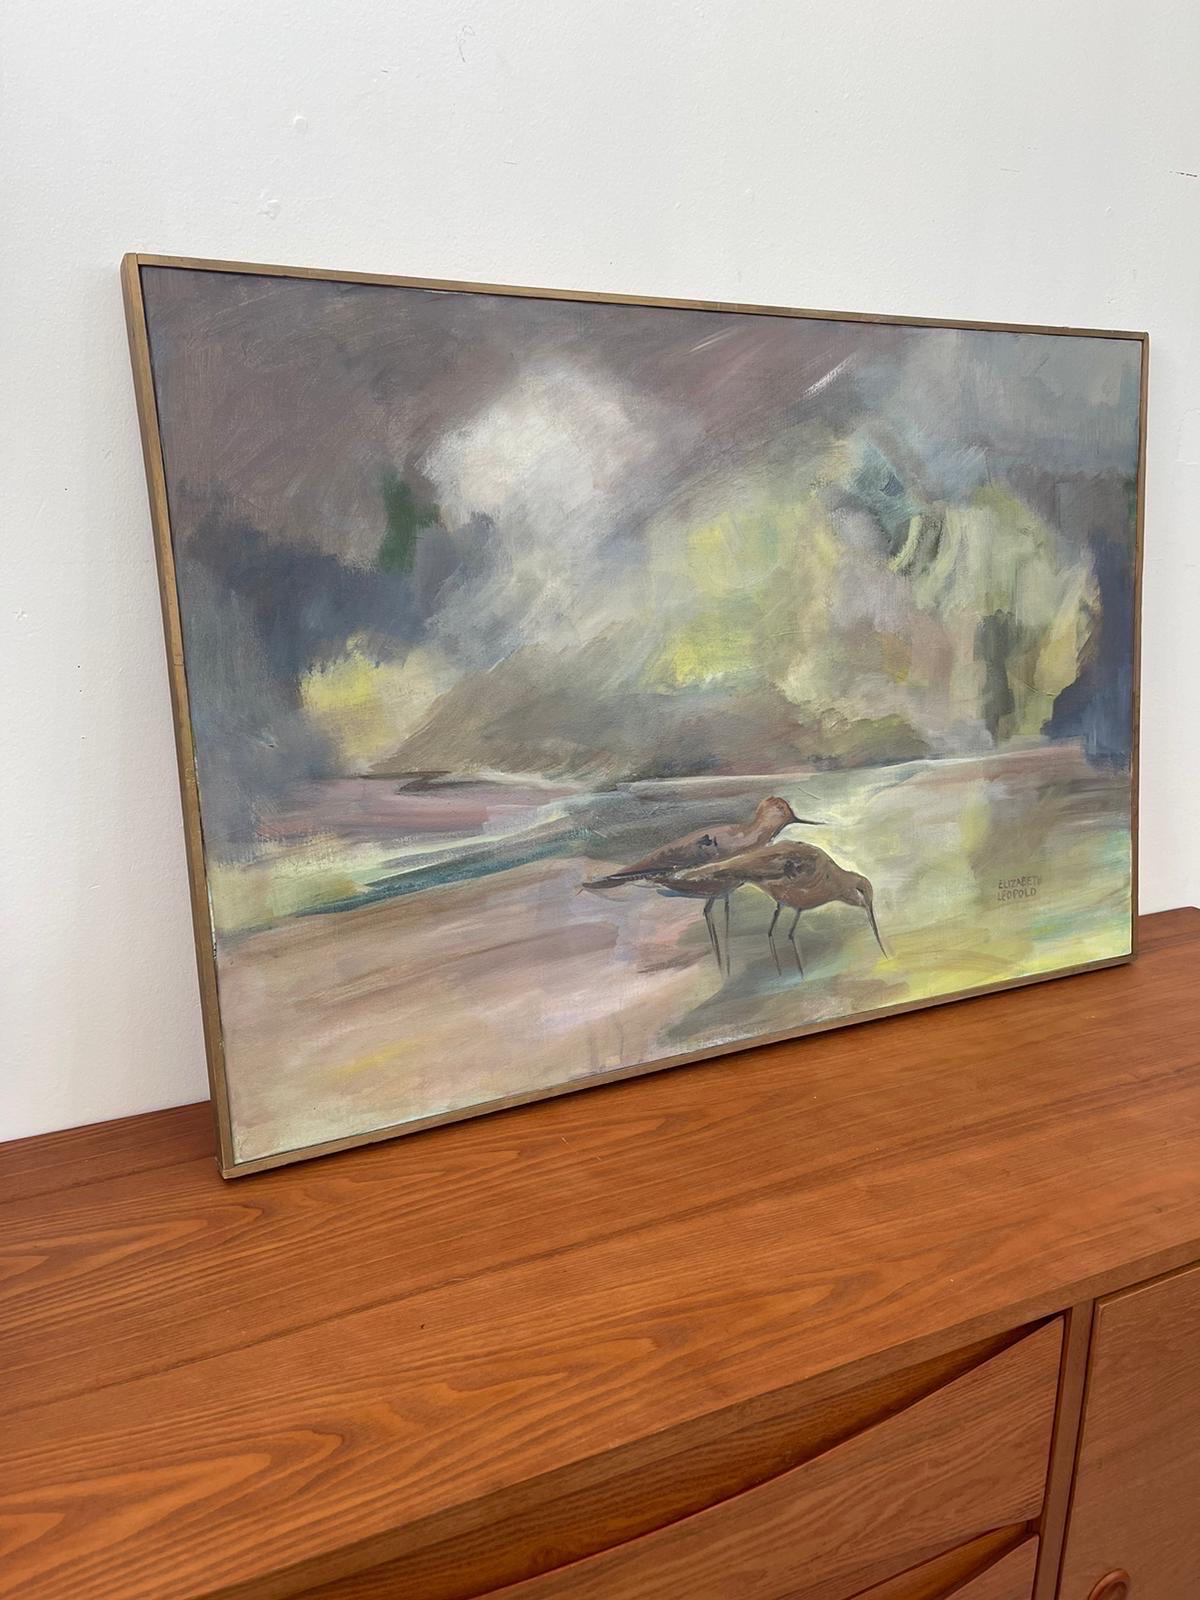 Elizabeth Leopold ( b.1916 ) painted this Circa 1960. Oil Painting on Canvas. Vintage Condition Consistent with Age as Pictured. 
 
Dimensions. 36 1/2 W ; 24 1/2 H